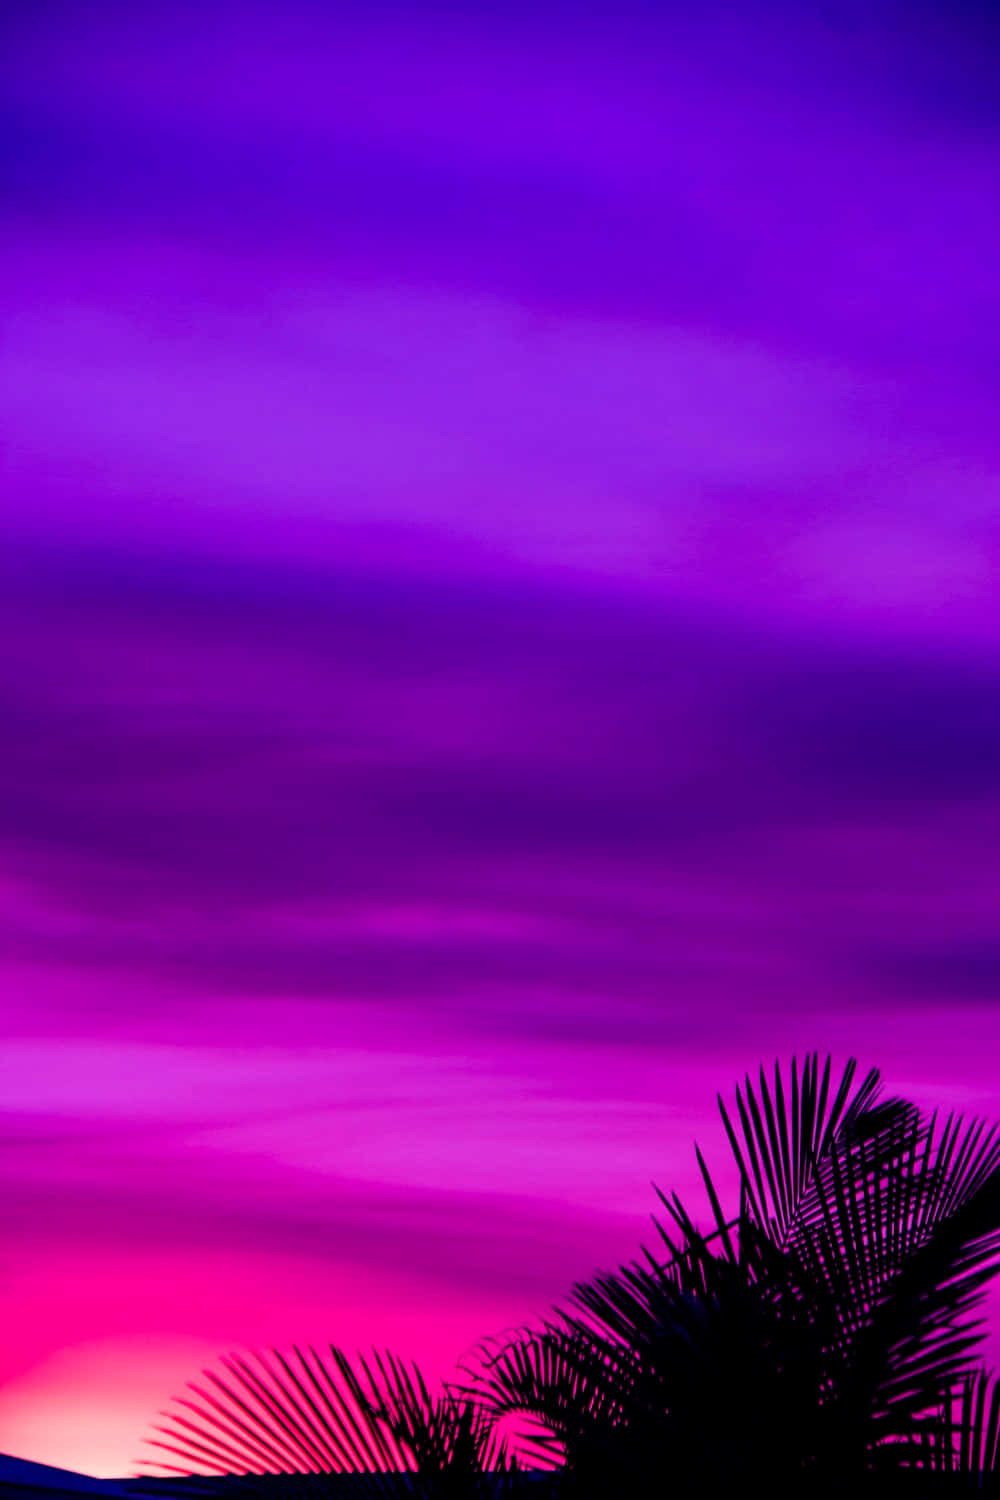 Aesthetic dreams come true in beautiful violet hues